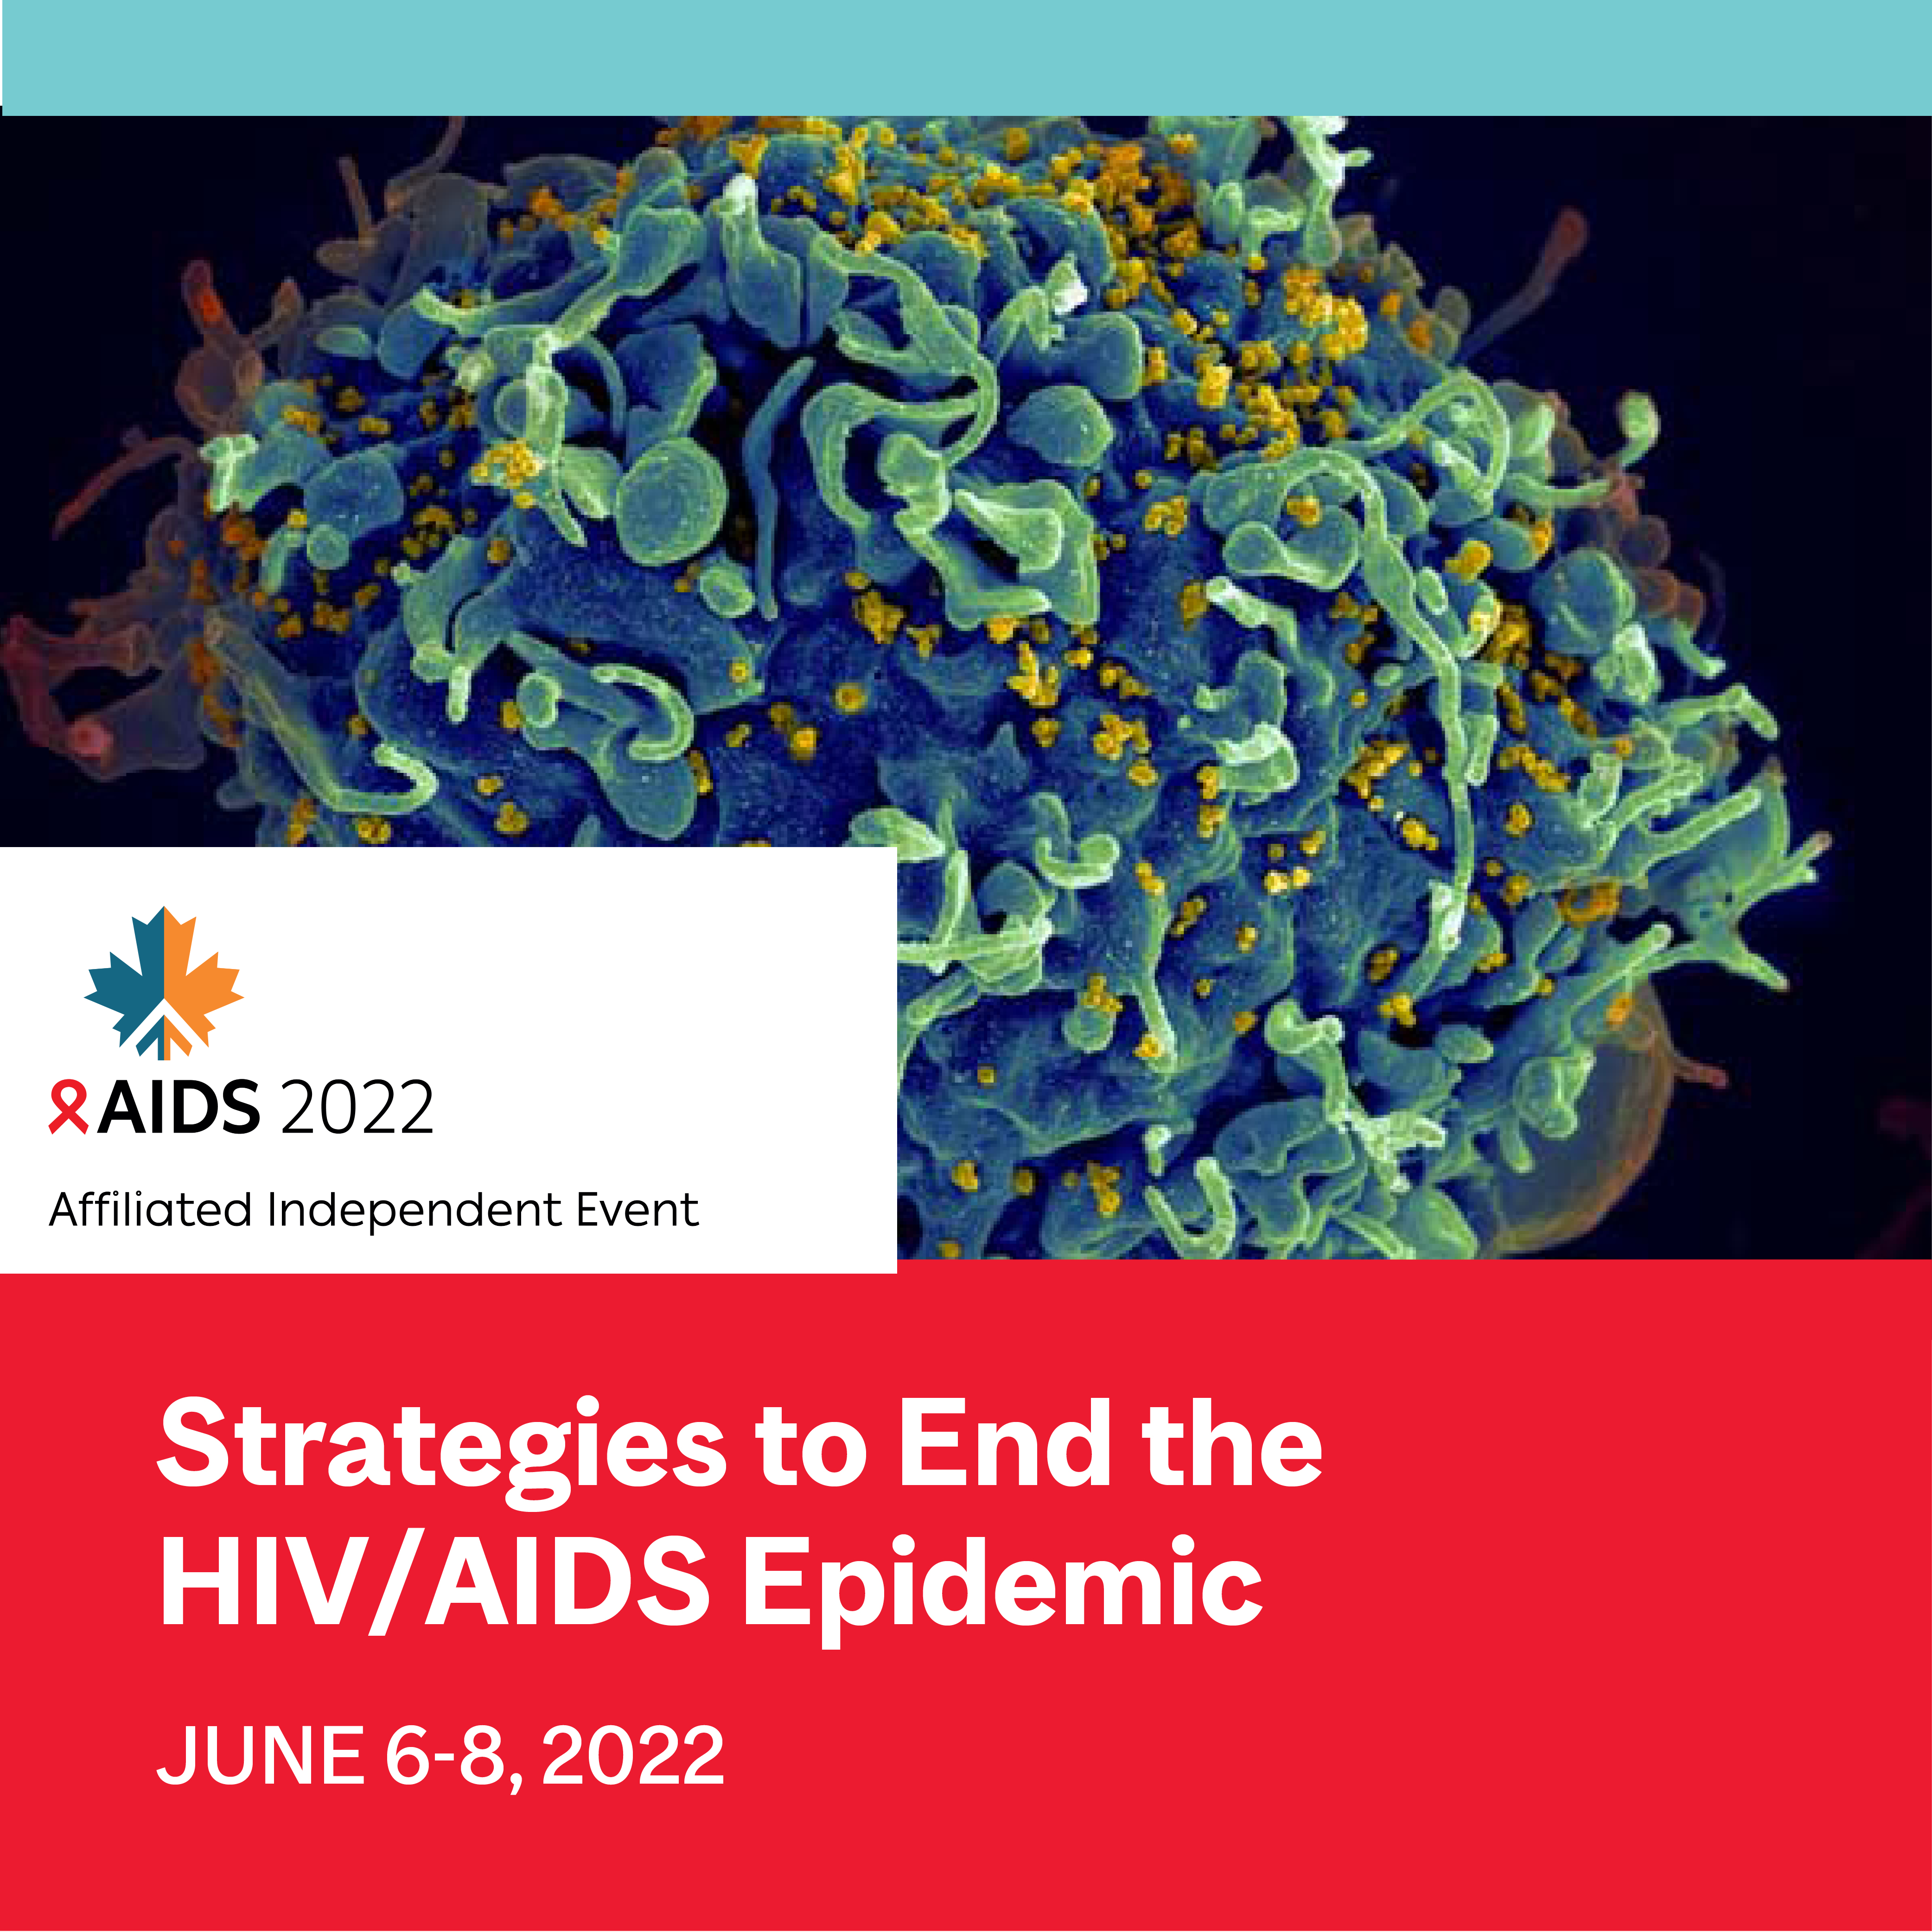 Rendering of  a T-Cell with the "AIDS 2022 Affiliated Independent event" logo. Text below image: Strategies to end the HIVAIDS epidemic June 6-8 2022